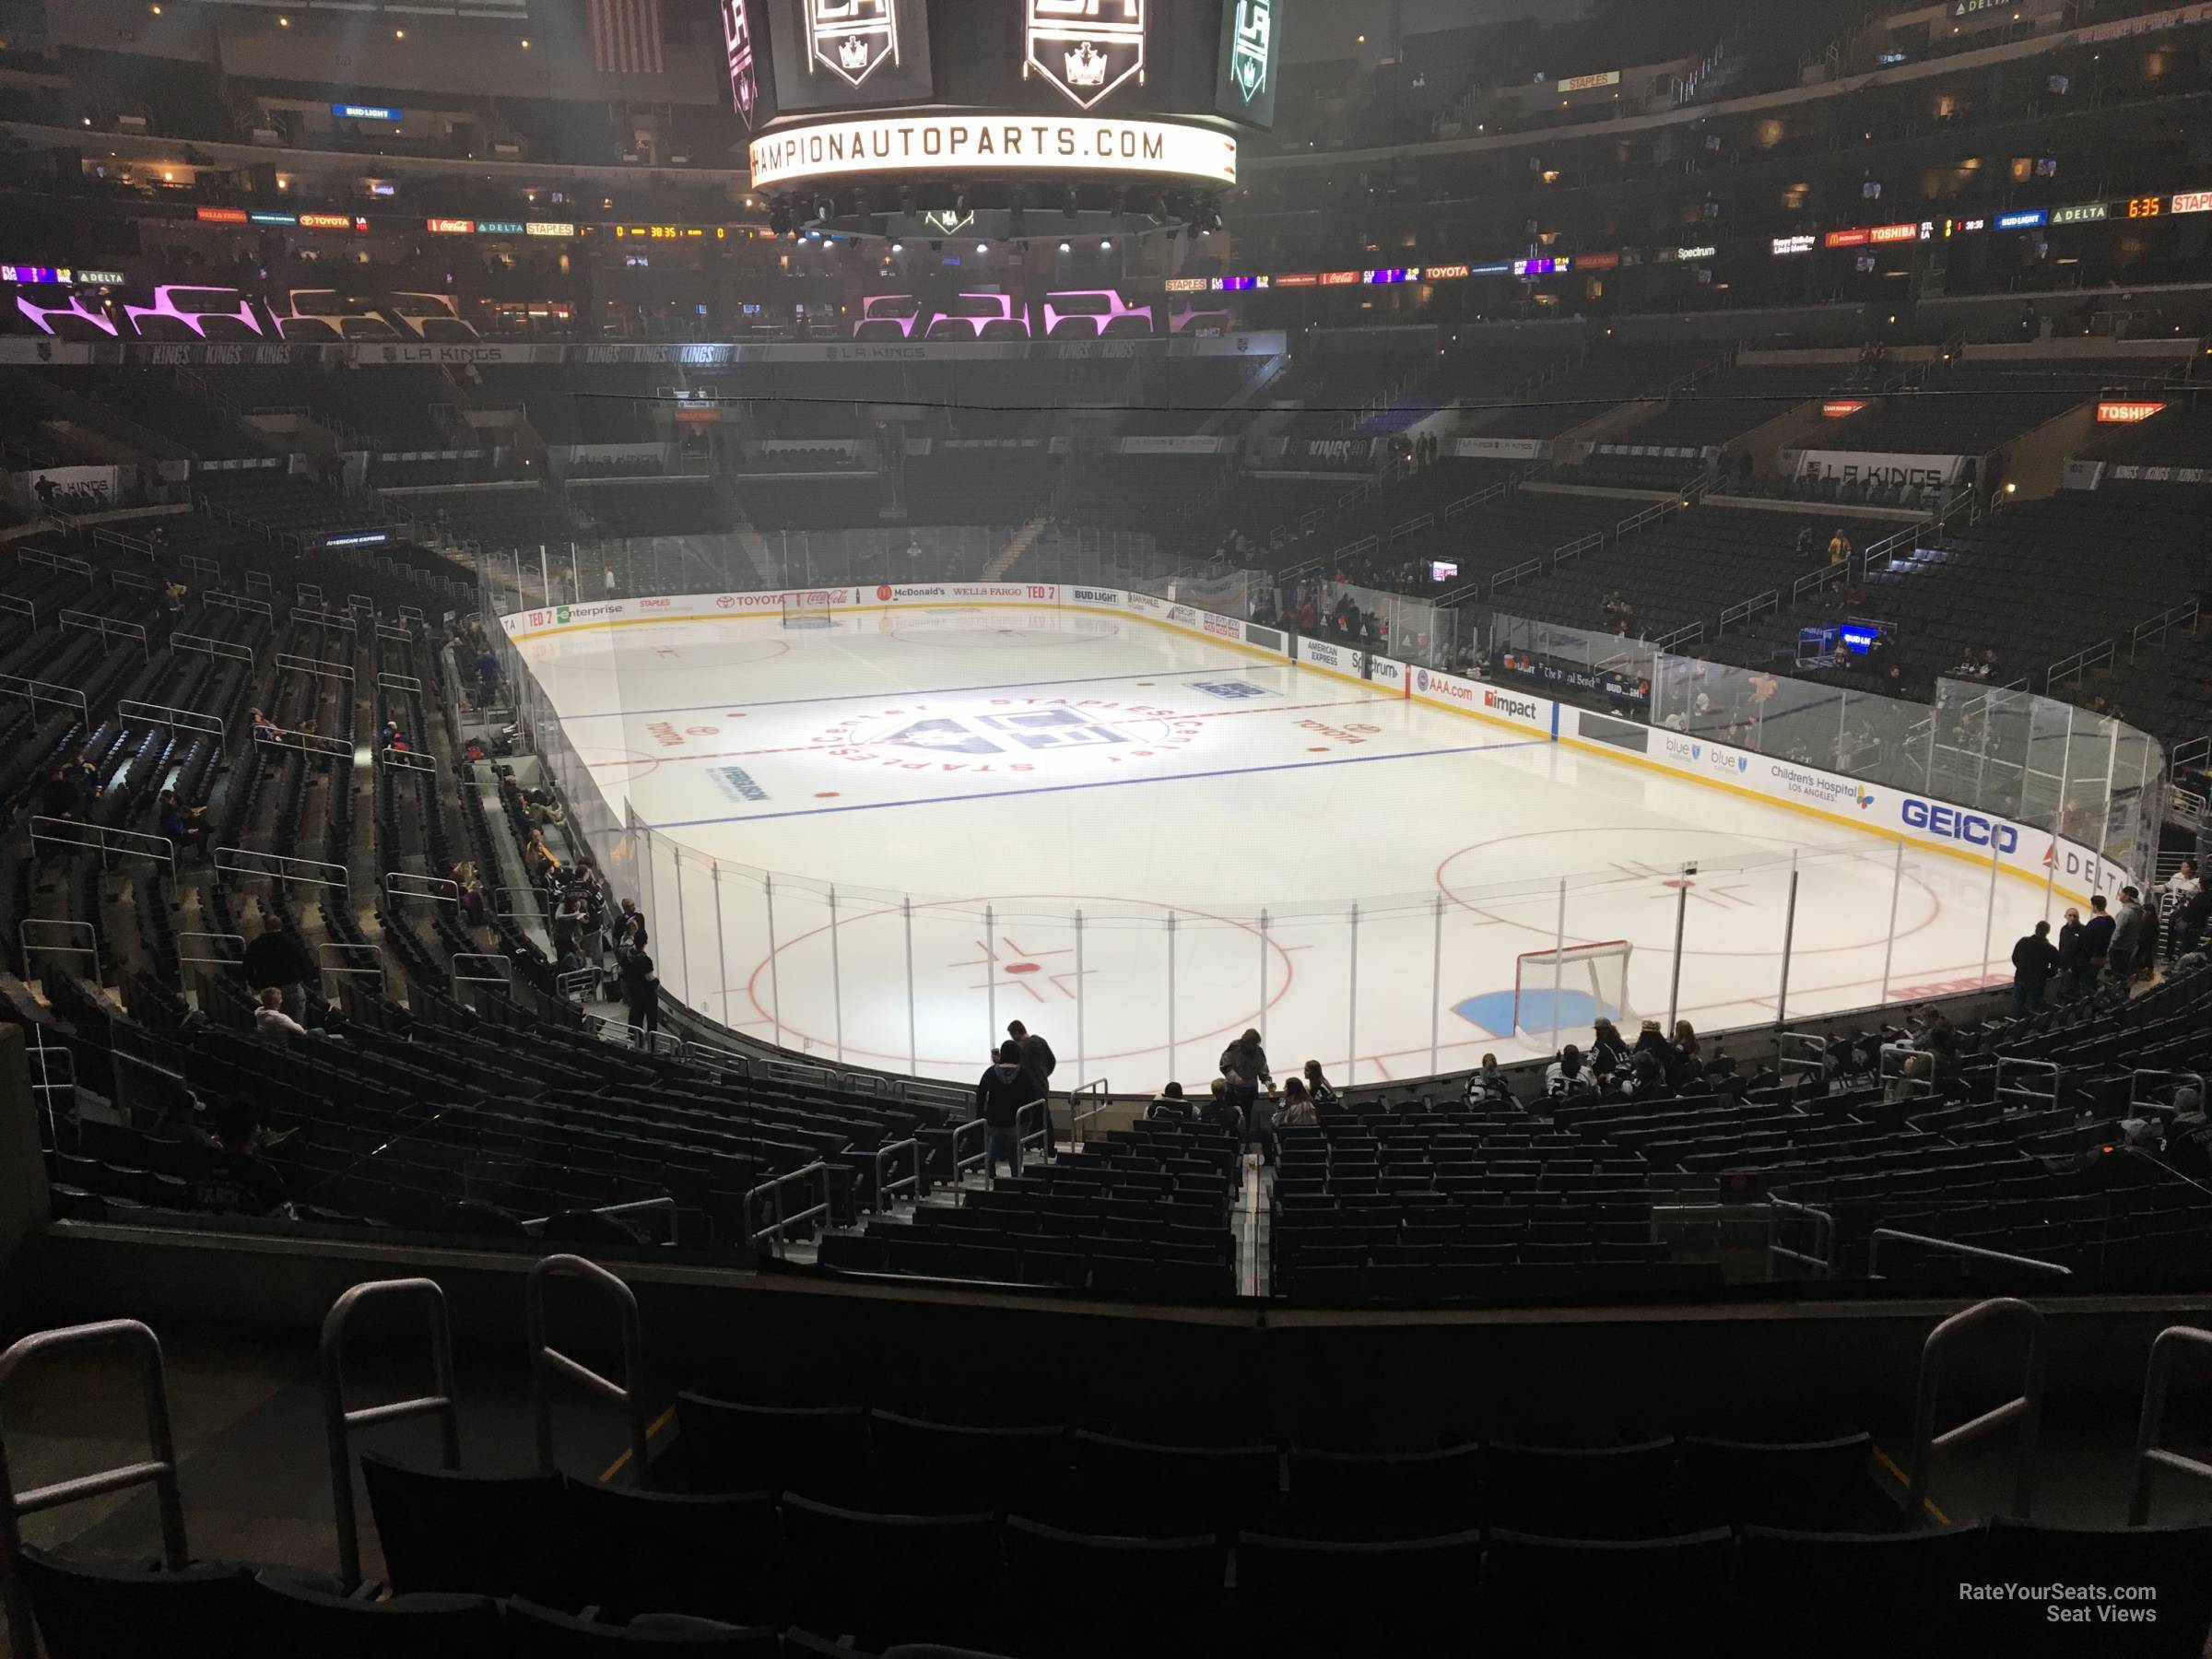 section 209, row 6 seat view  for hockey - crypto.com arena